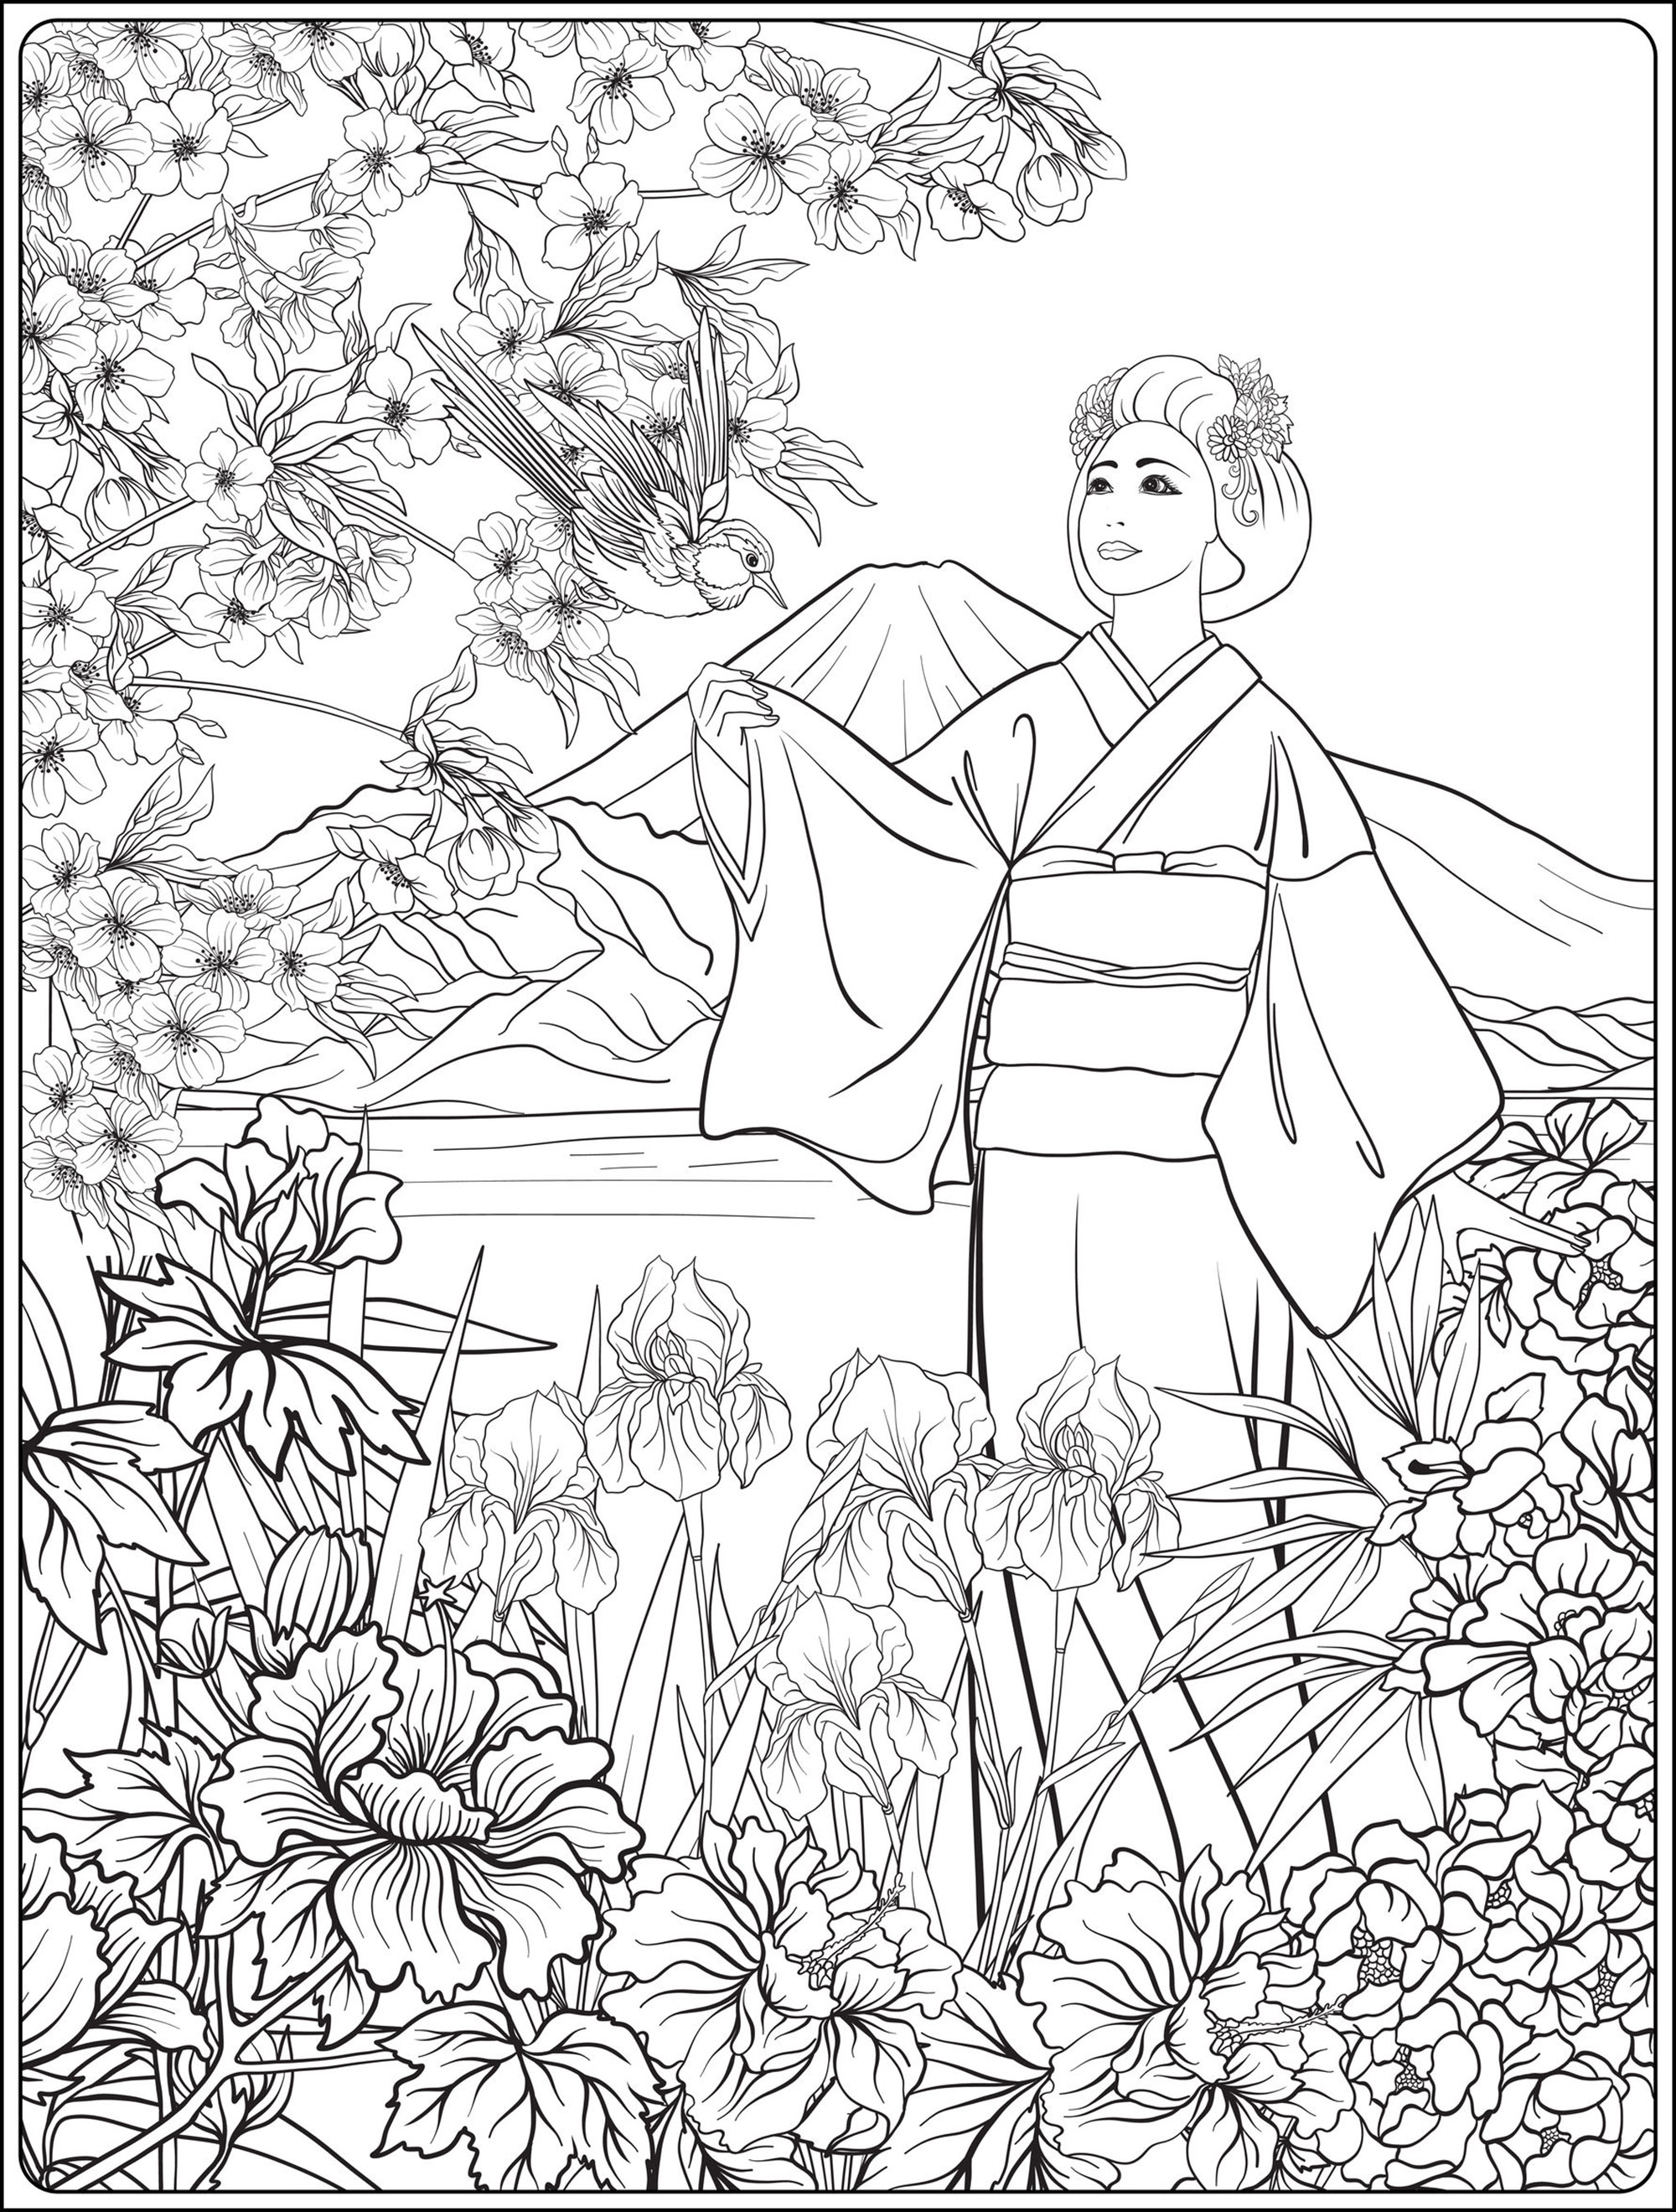 Japanese Landscape with Japanese woman in kimono - Japan Adult Coloring